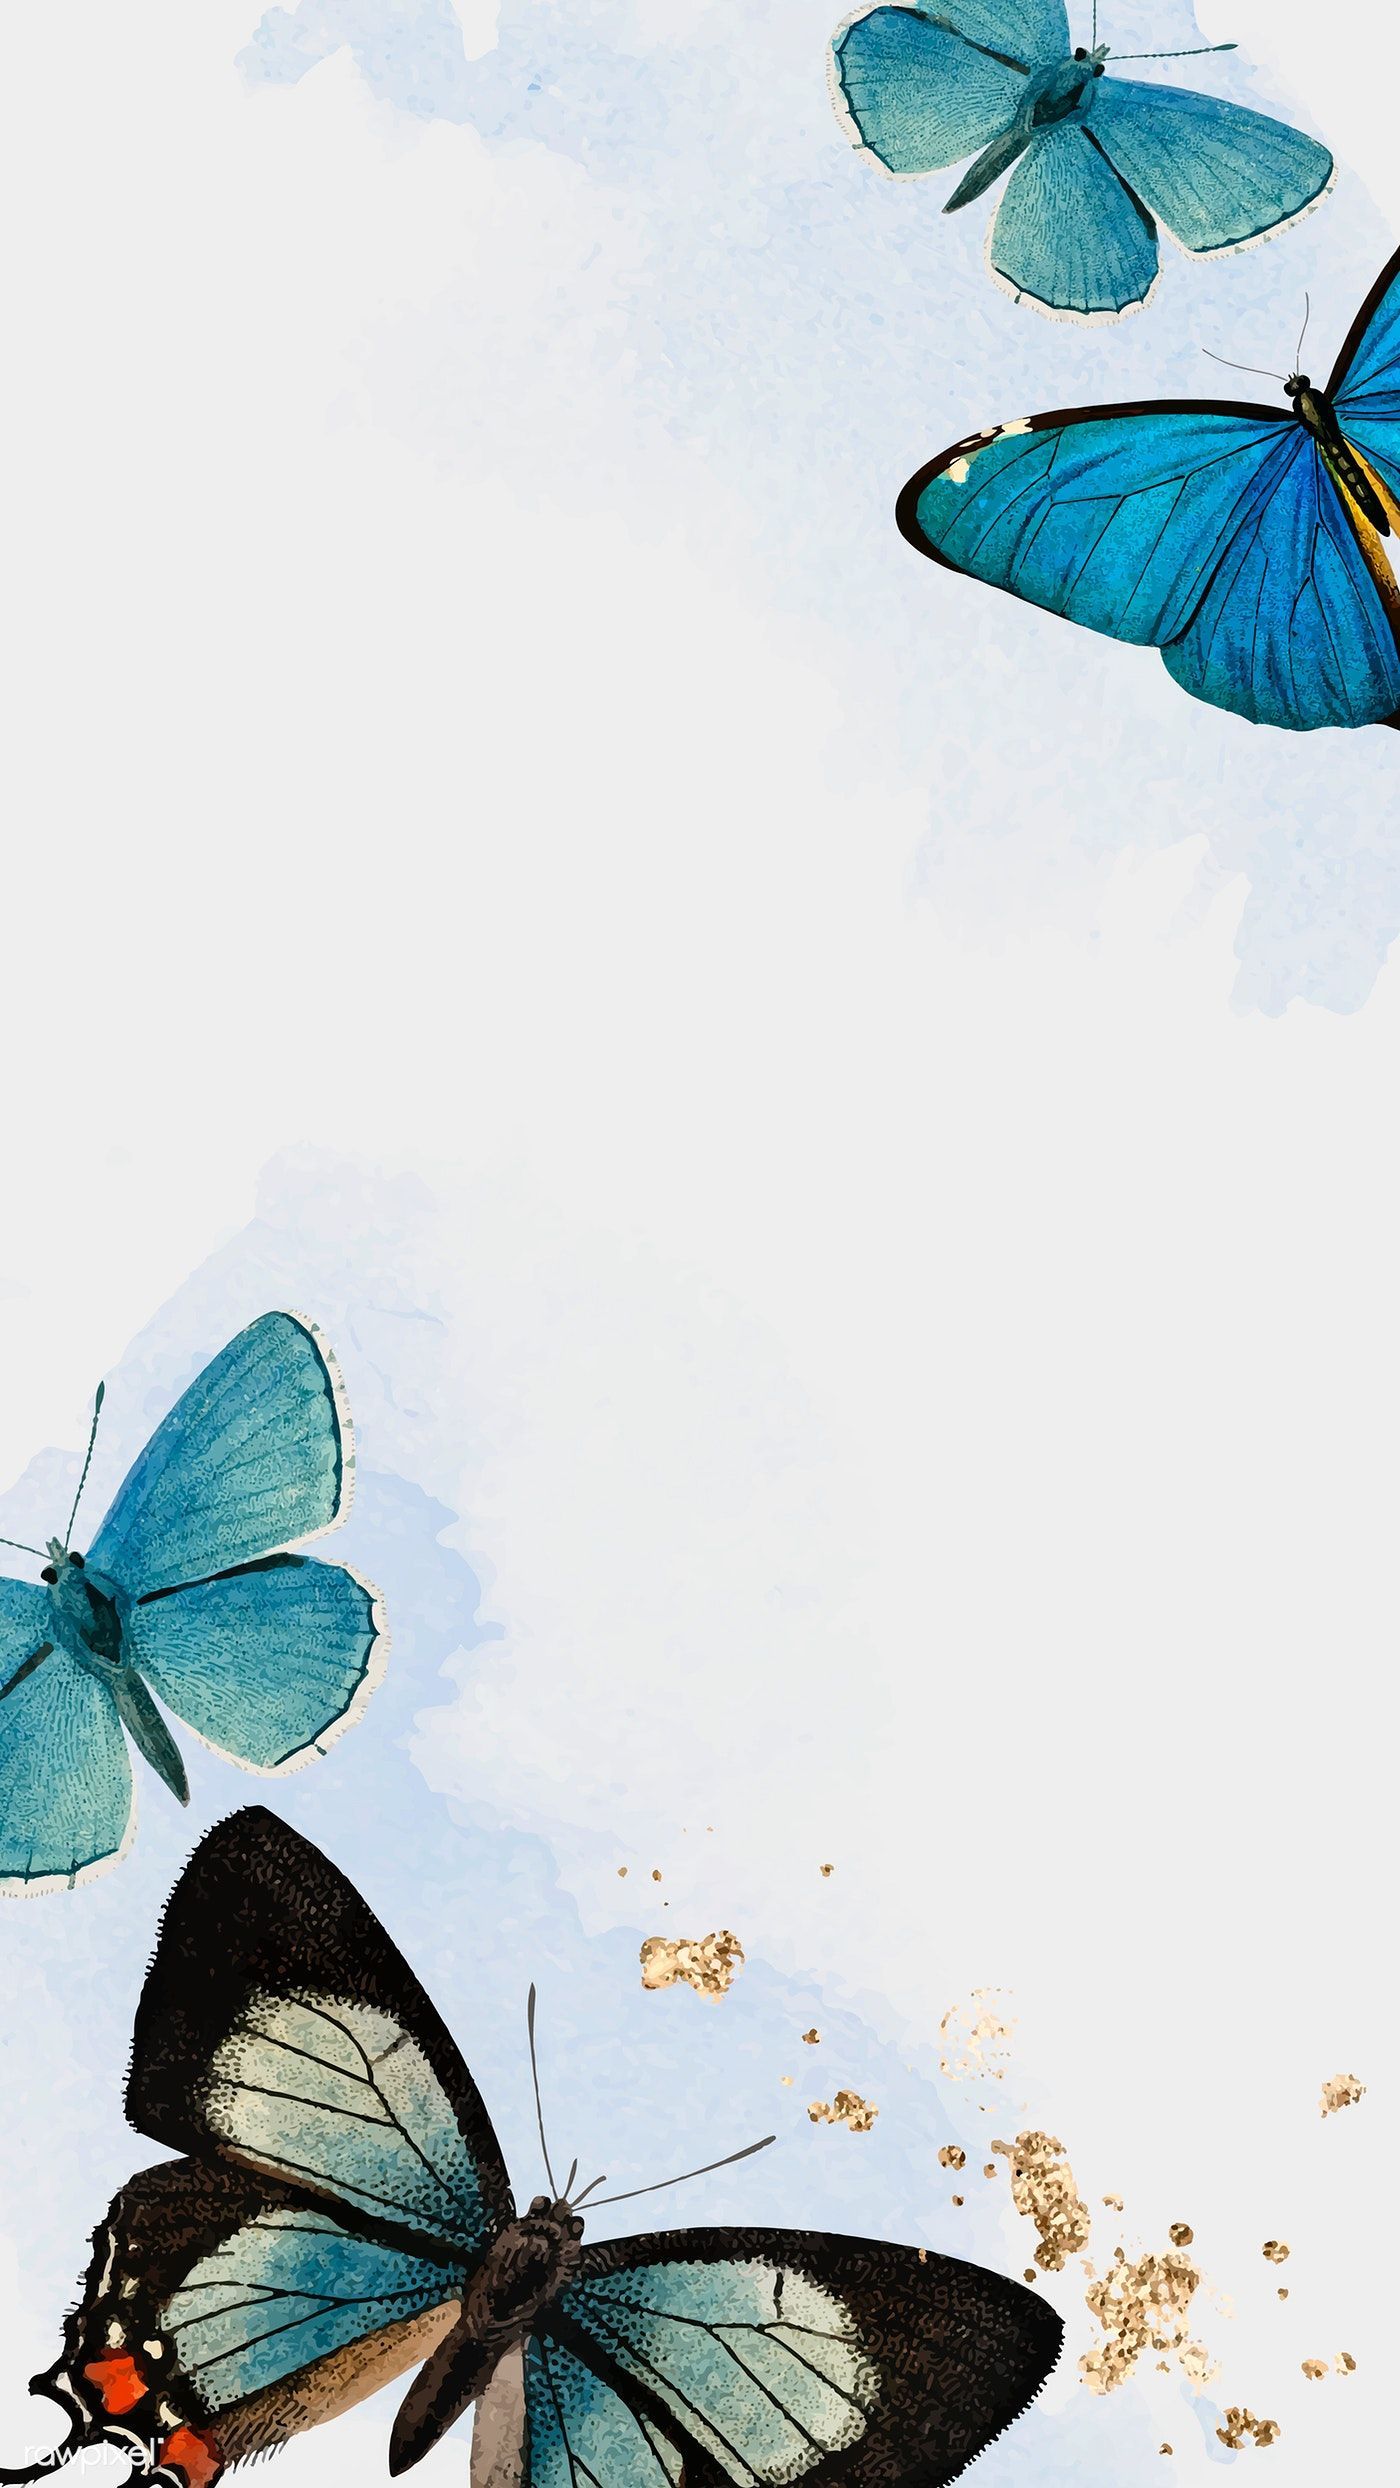 Download premium vector of Blue butterflies patterned mobile phone